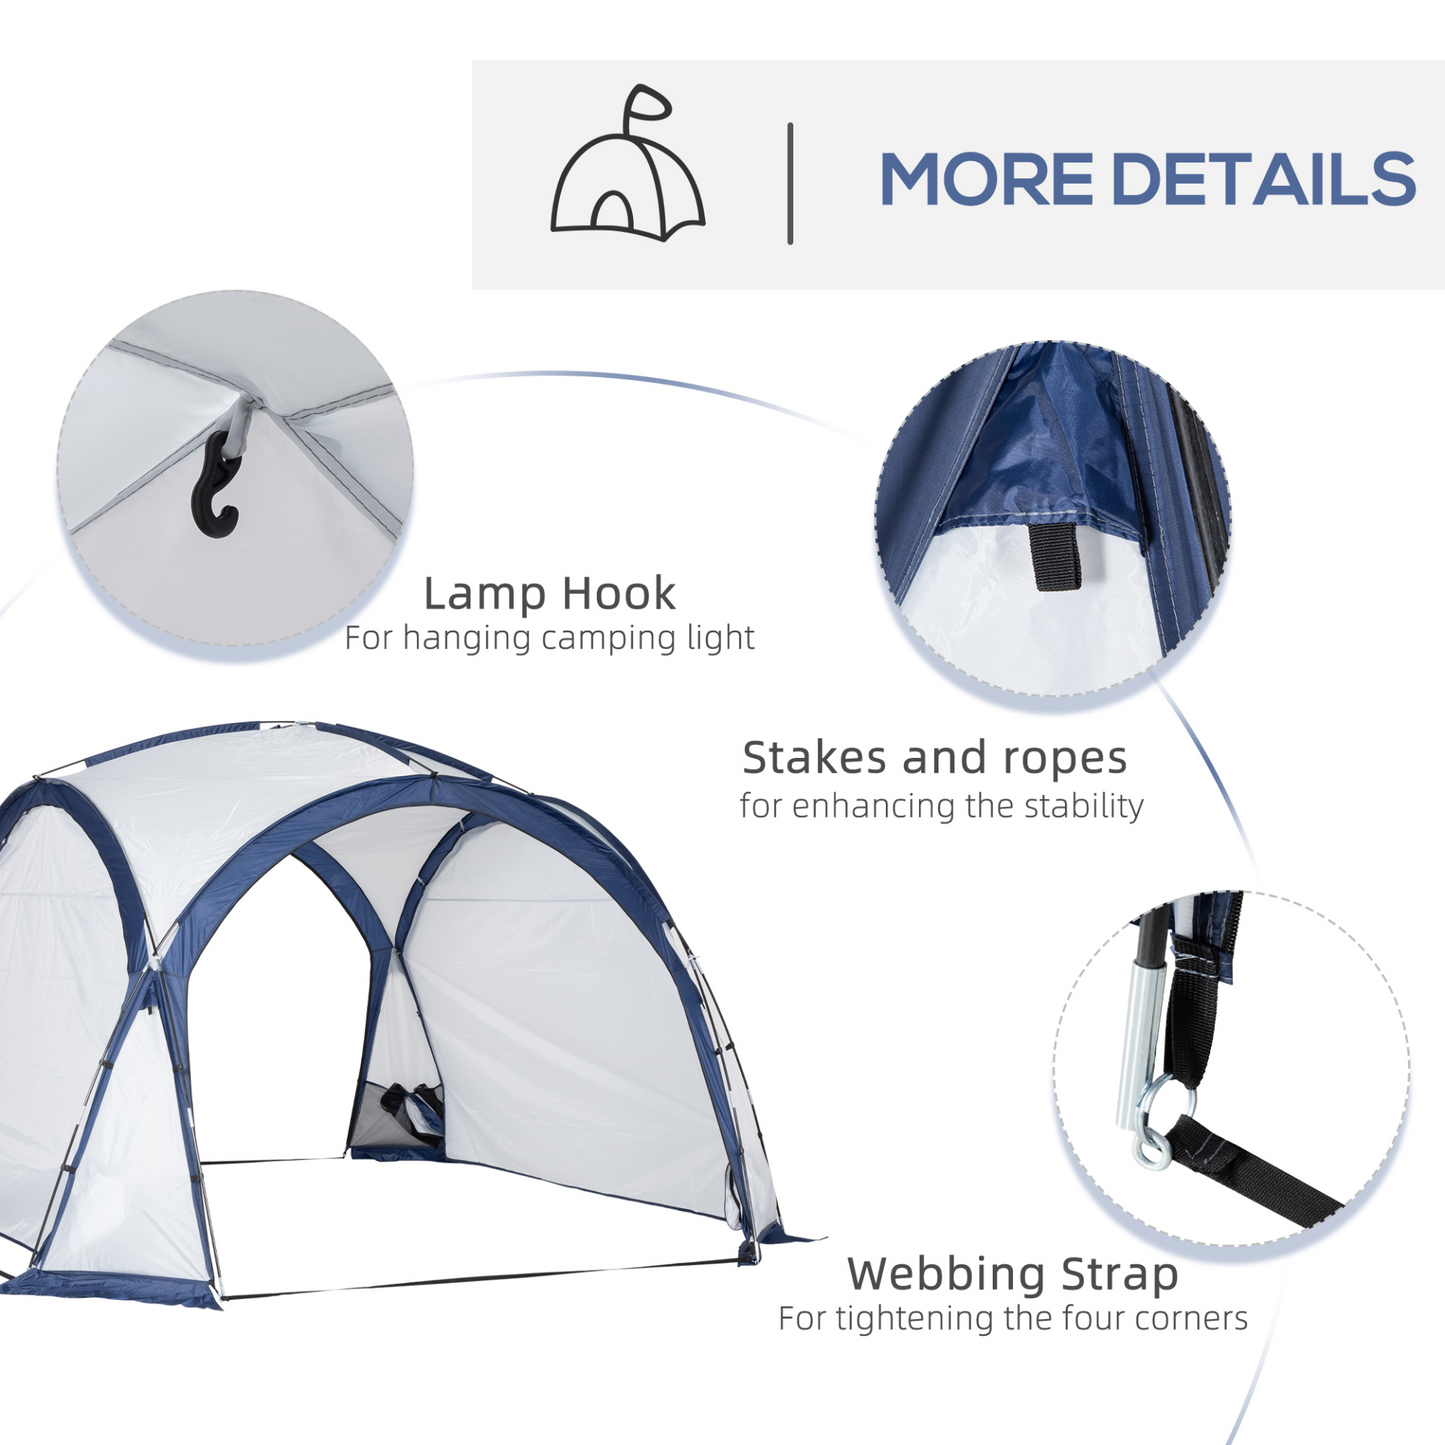 Outsunny Dome Tent for 6-8 Person, Camping Tent with 4 Zipped Mesh Doors, Removable Polyester Cloth, Lamp Hook, Portable Carry Bag, White and Blue